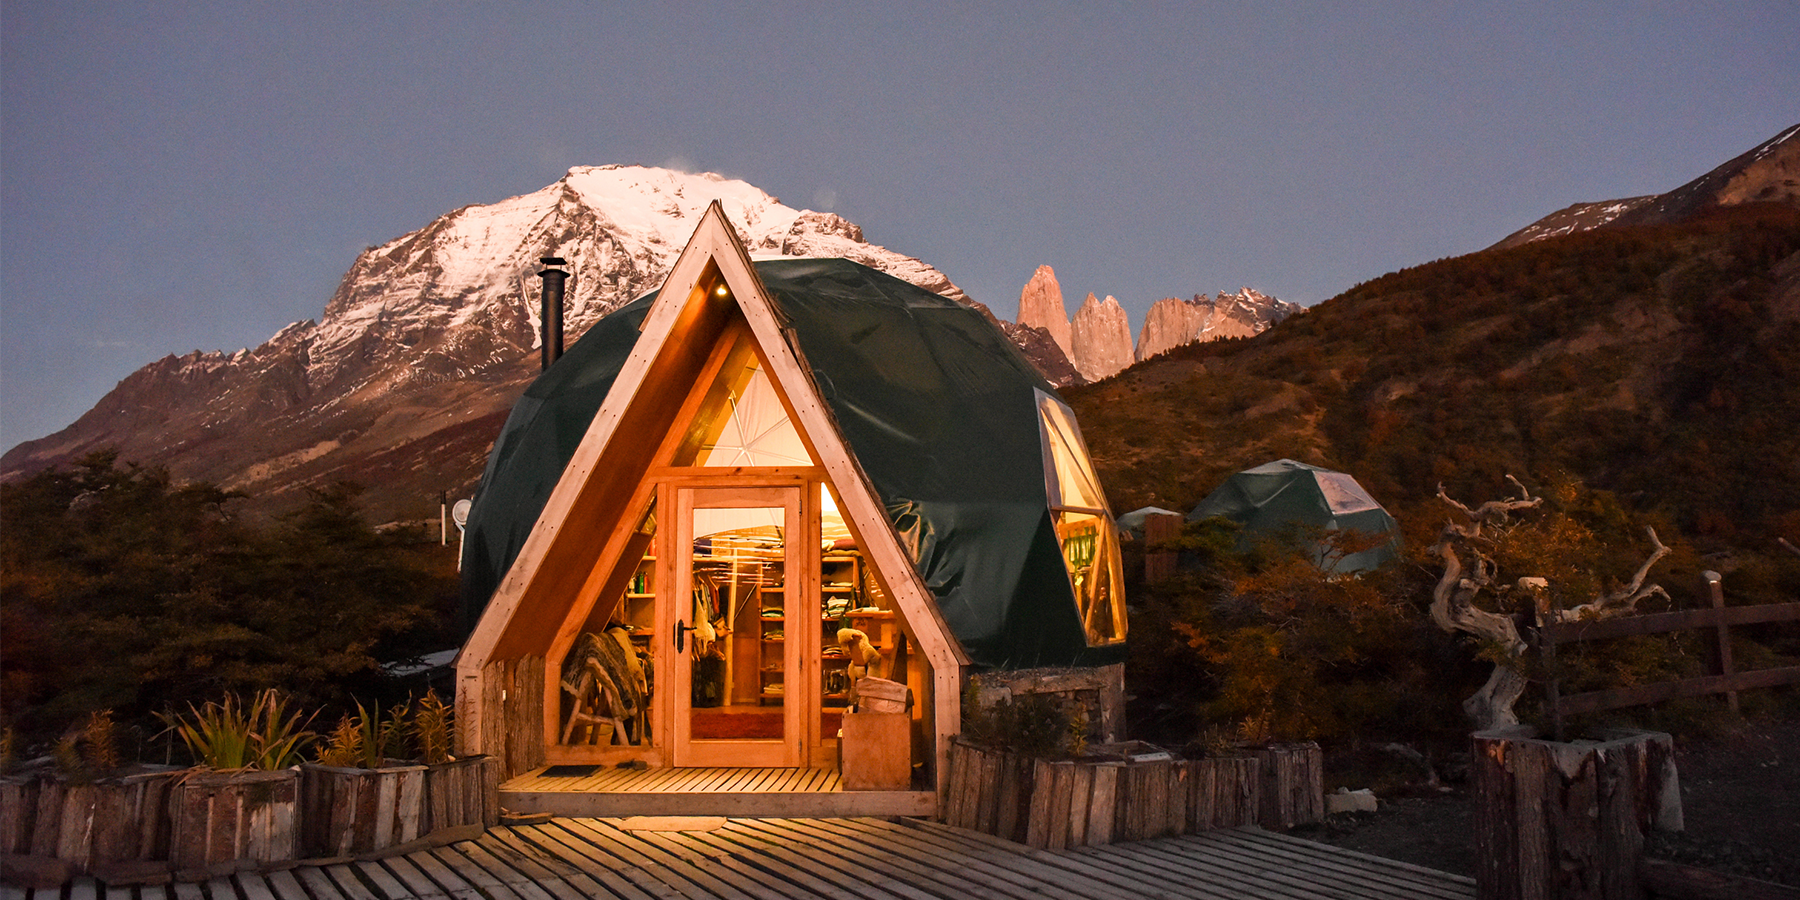 EcoCamp Patagonia Located in Torres Del Paines, Chile